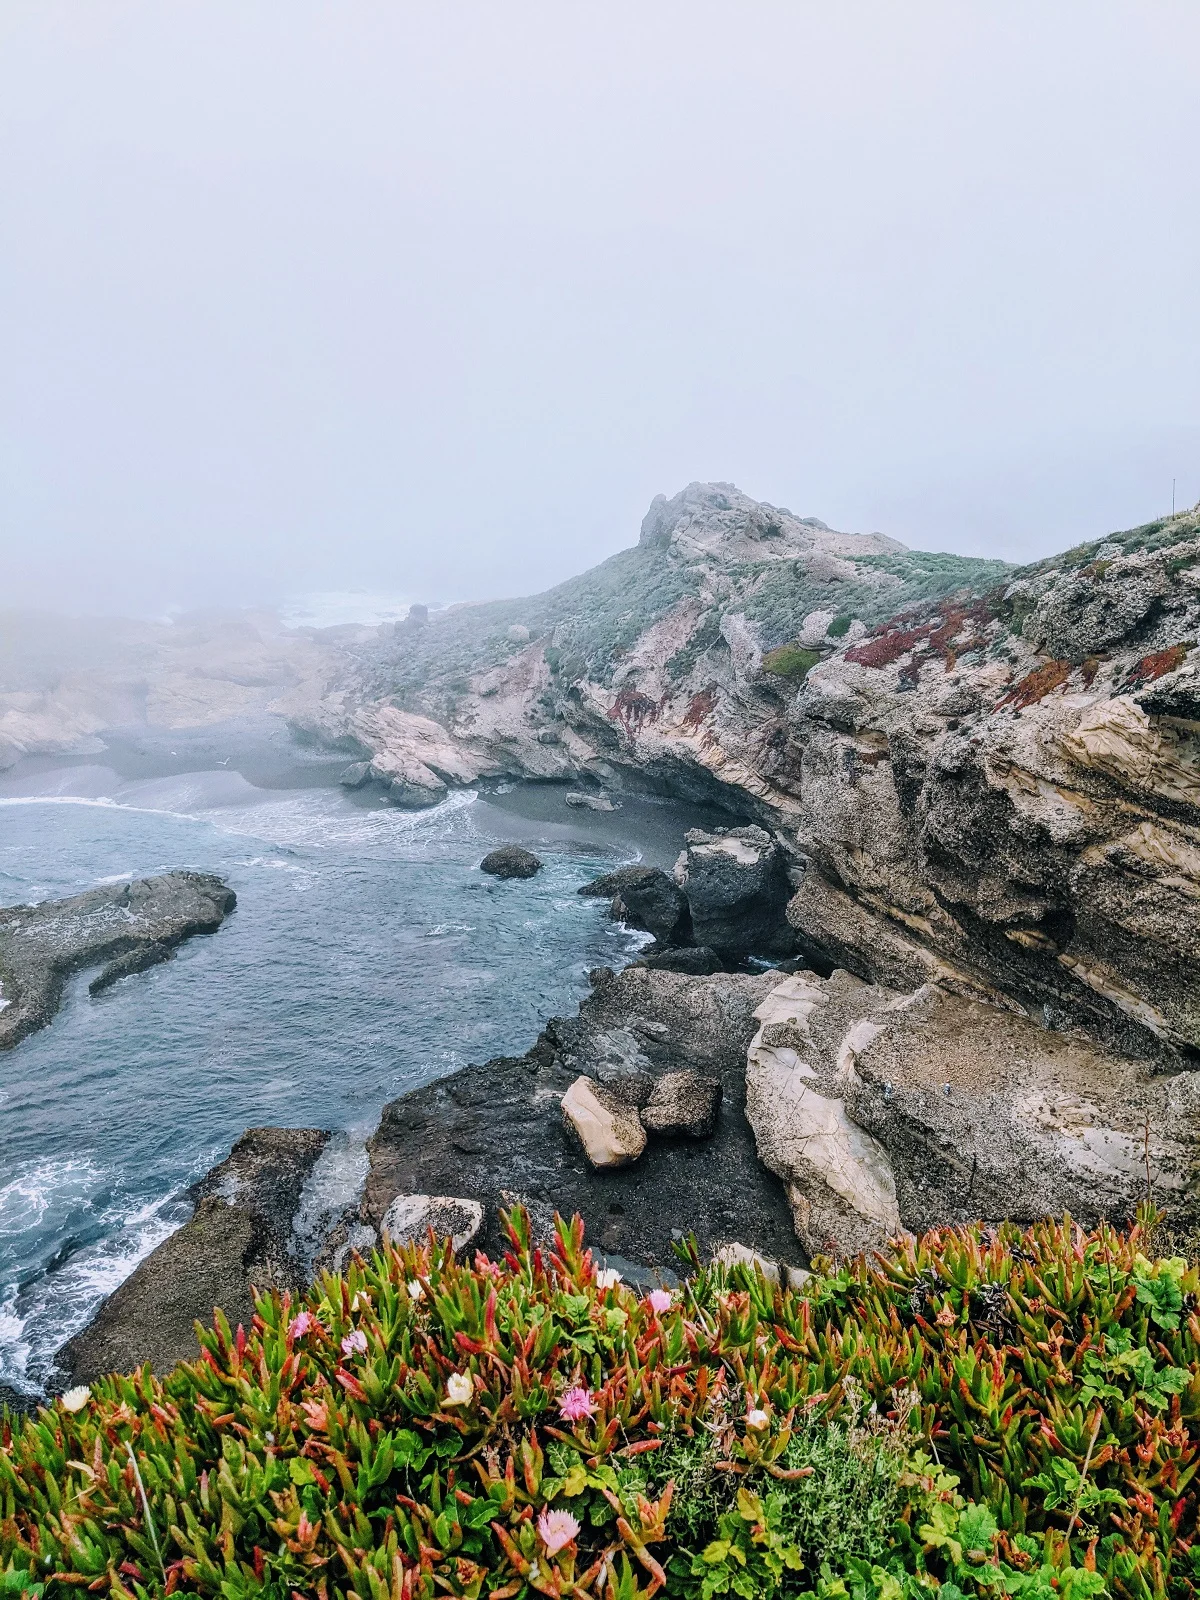 foggy cliff along the california coast with rocky shore and colorful bush in foreground